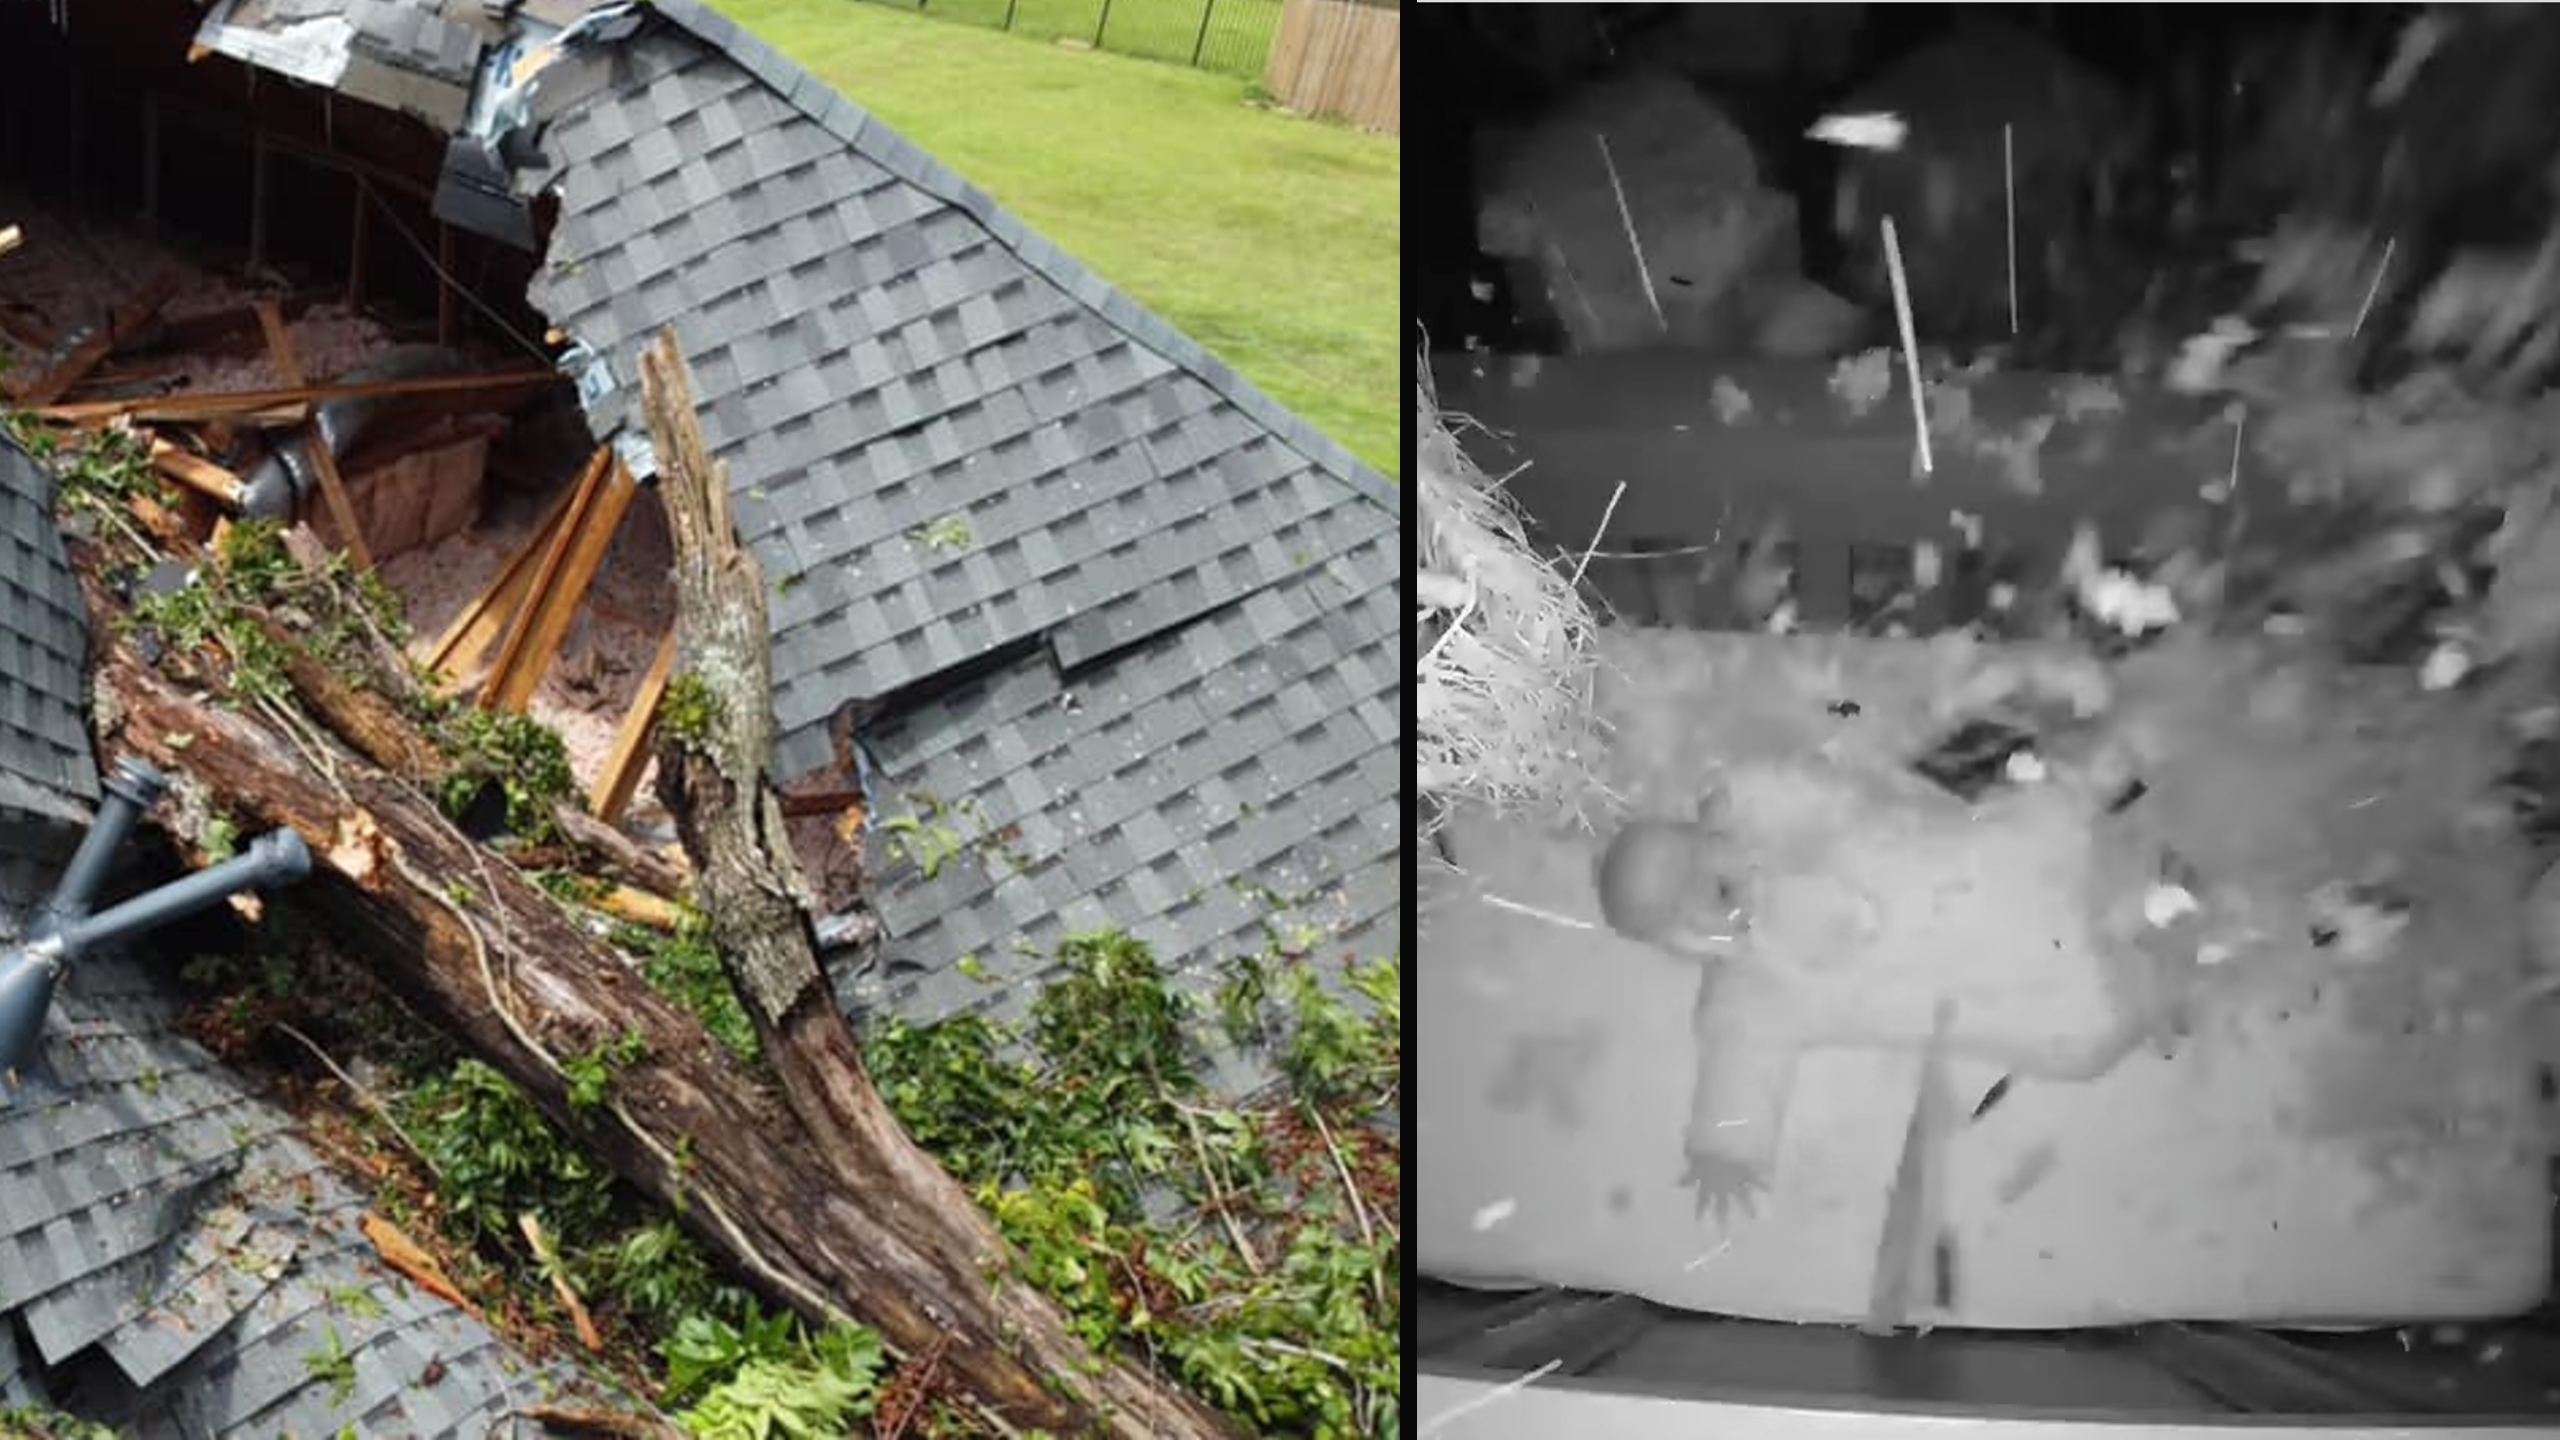 Baby Spared from tree that crushes home